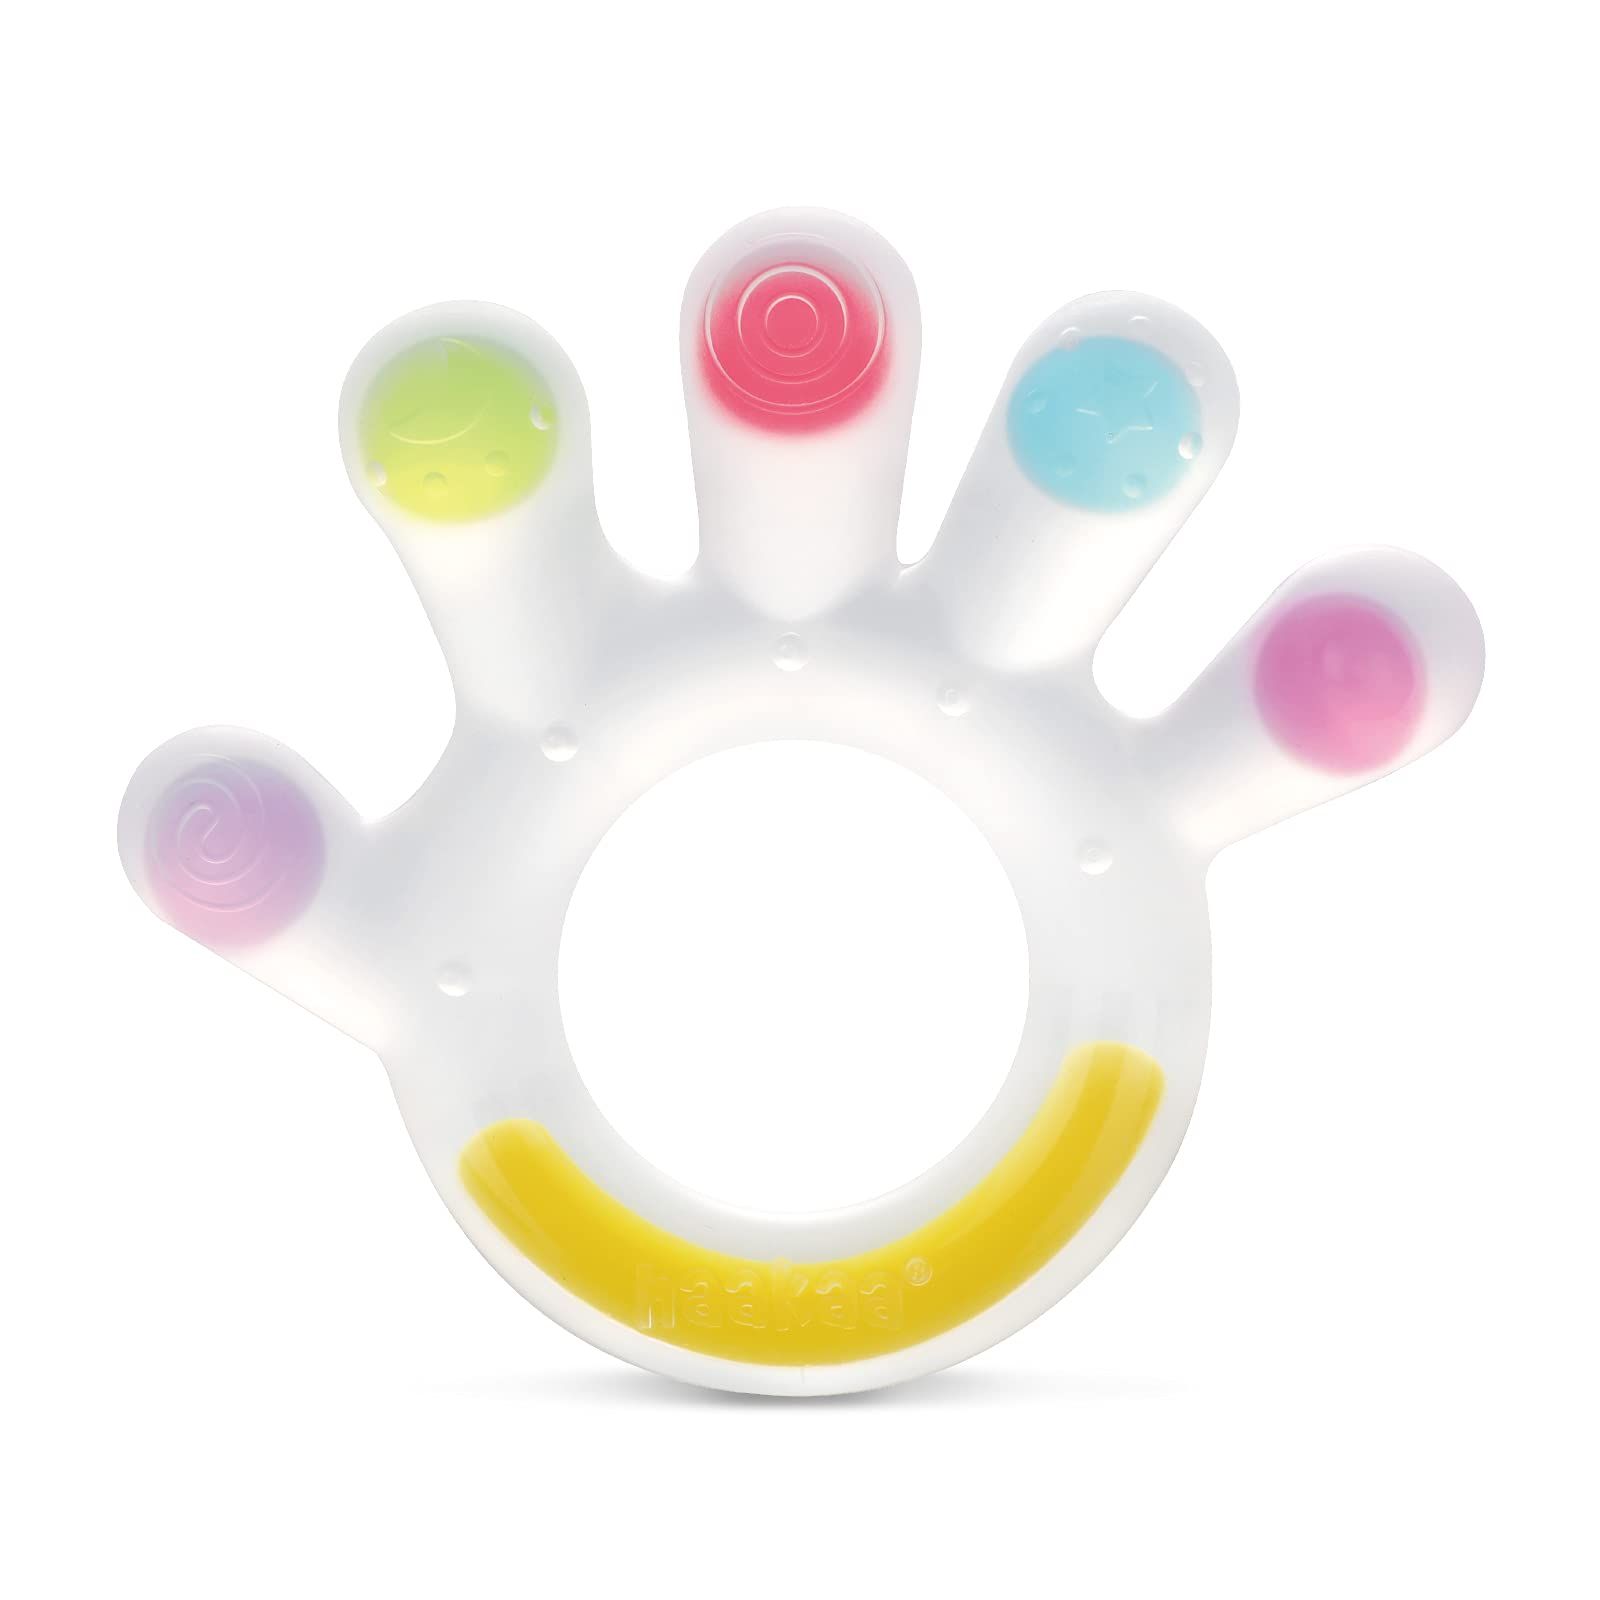 haakaa Palm Teether - Super Soft Silicone Baby Soothing Teether Pacifier, Teething Toys for 3M+ Babi | Amazon (US)